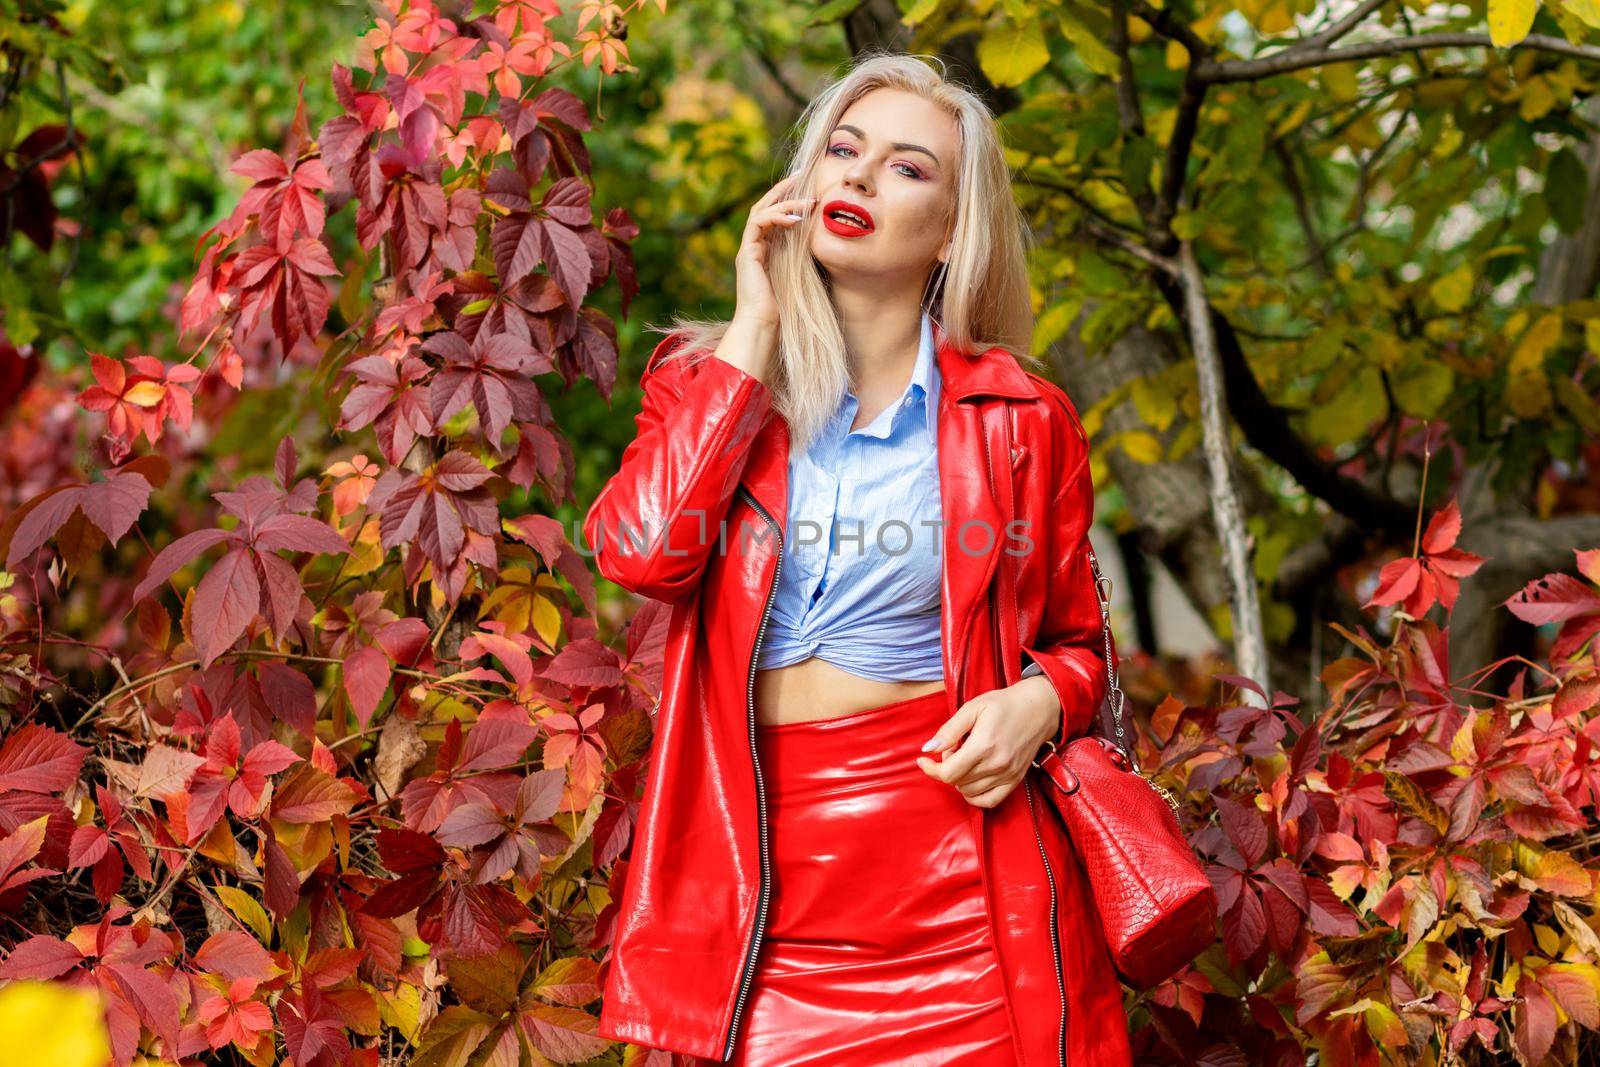 A fashionable woman wears a trendy white and blue shirt and red skirt and leather jacket on a city street. Stylish young blonde lady with bright makeup.